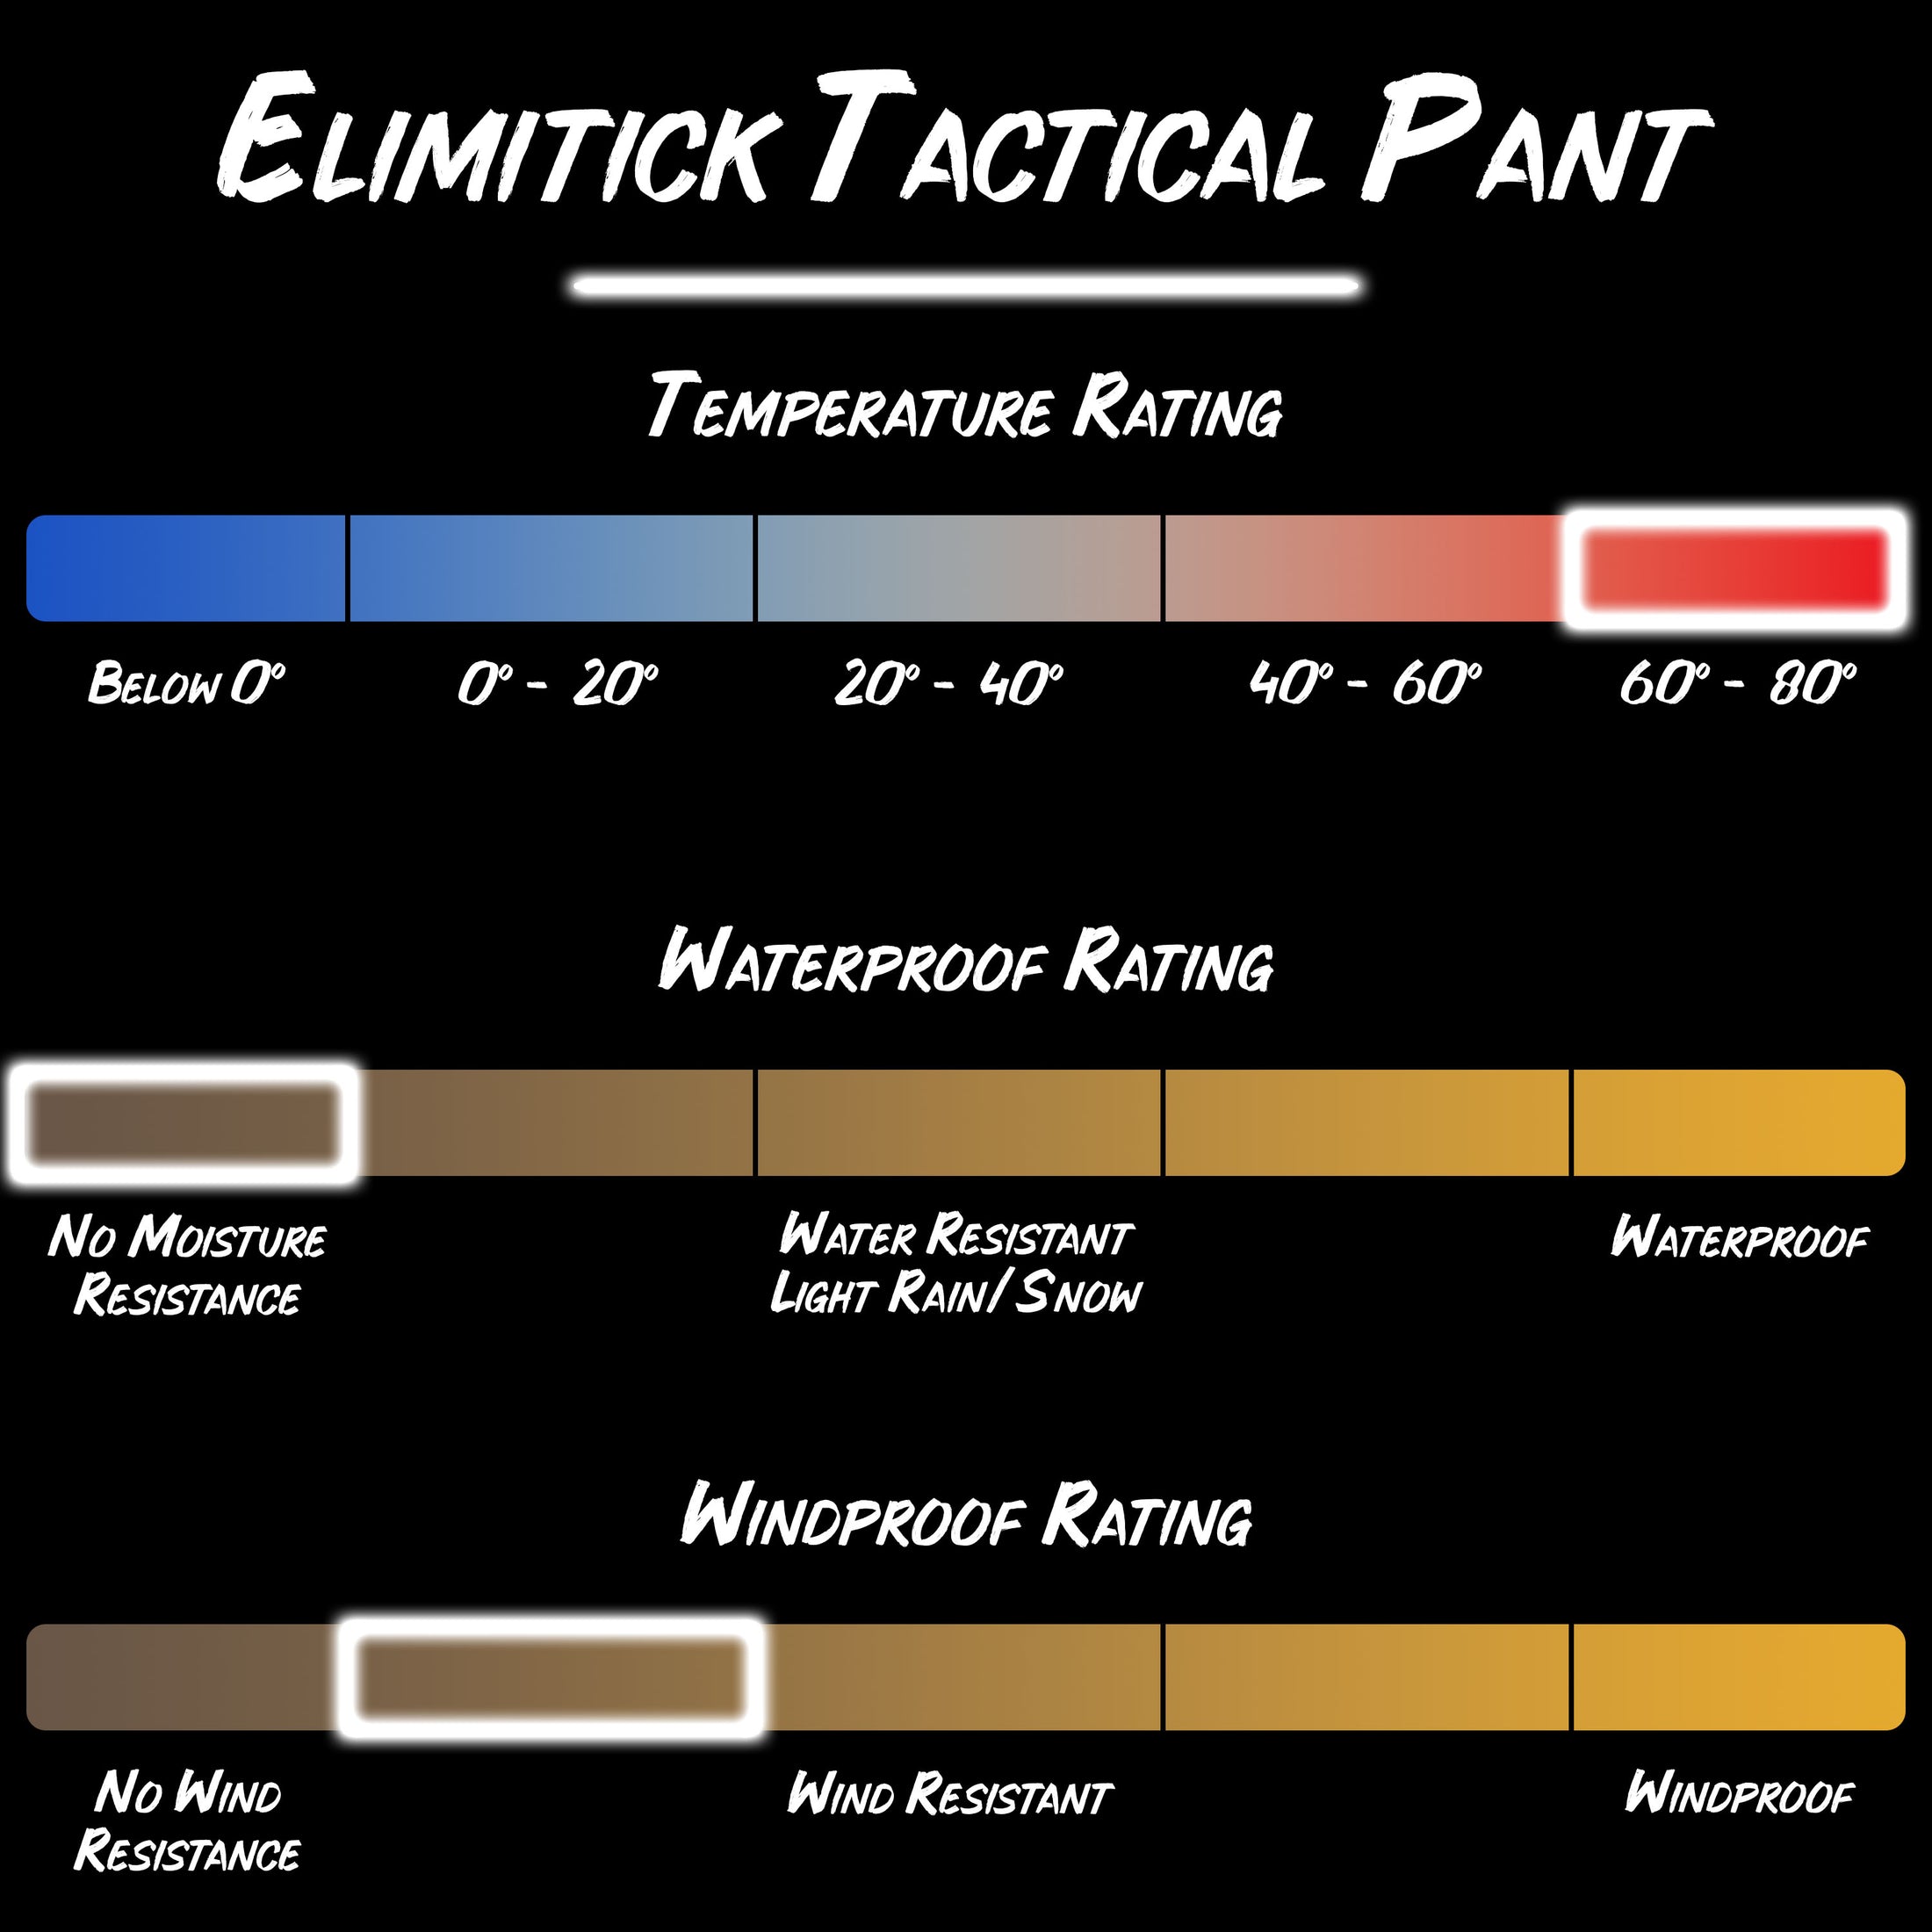 Elimitick tactical pant product specifications